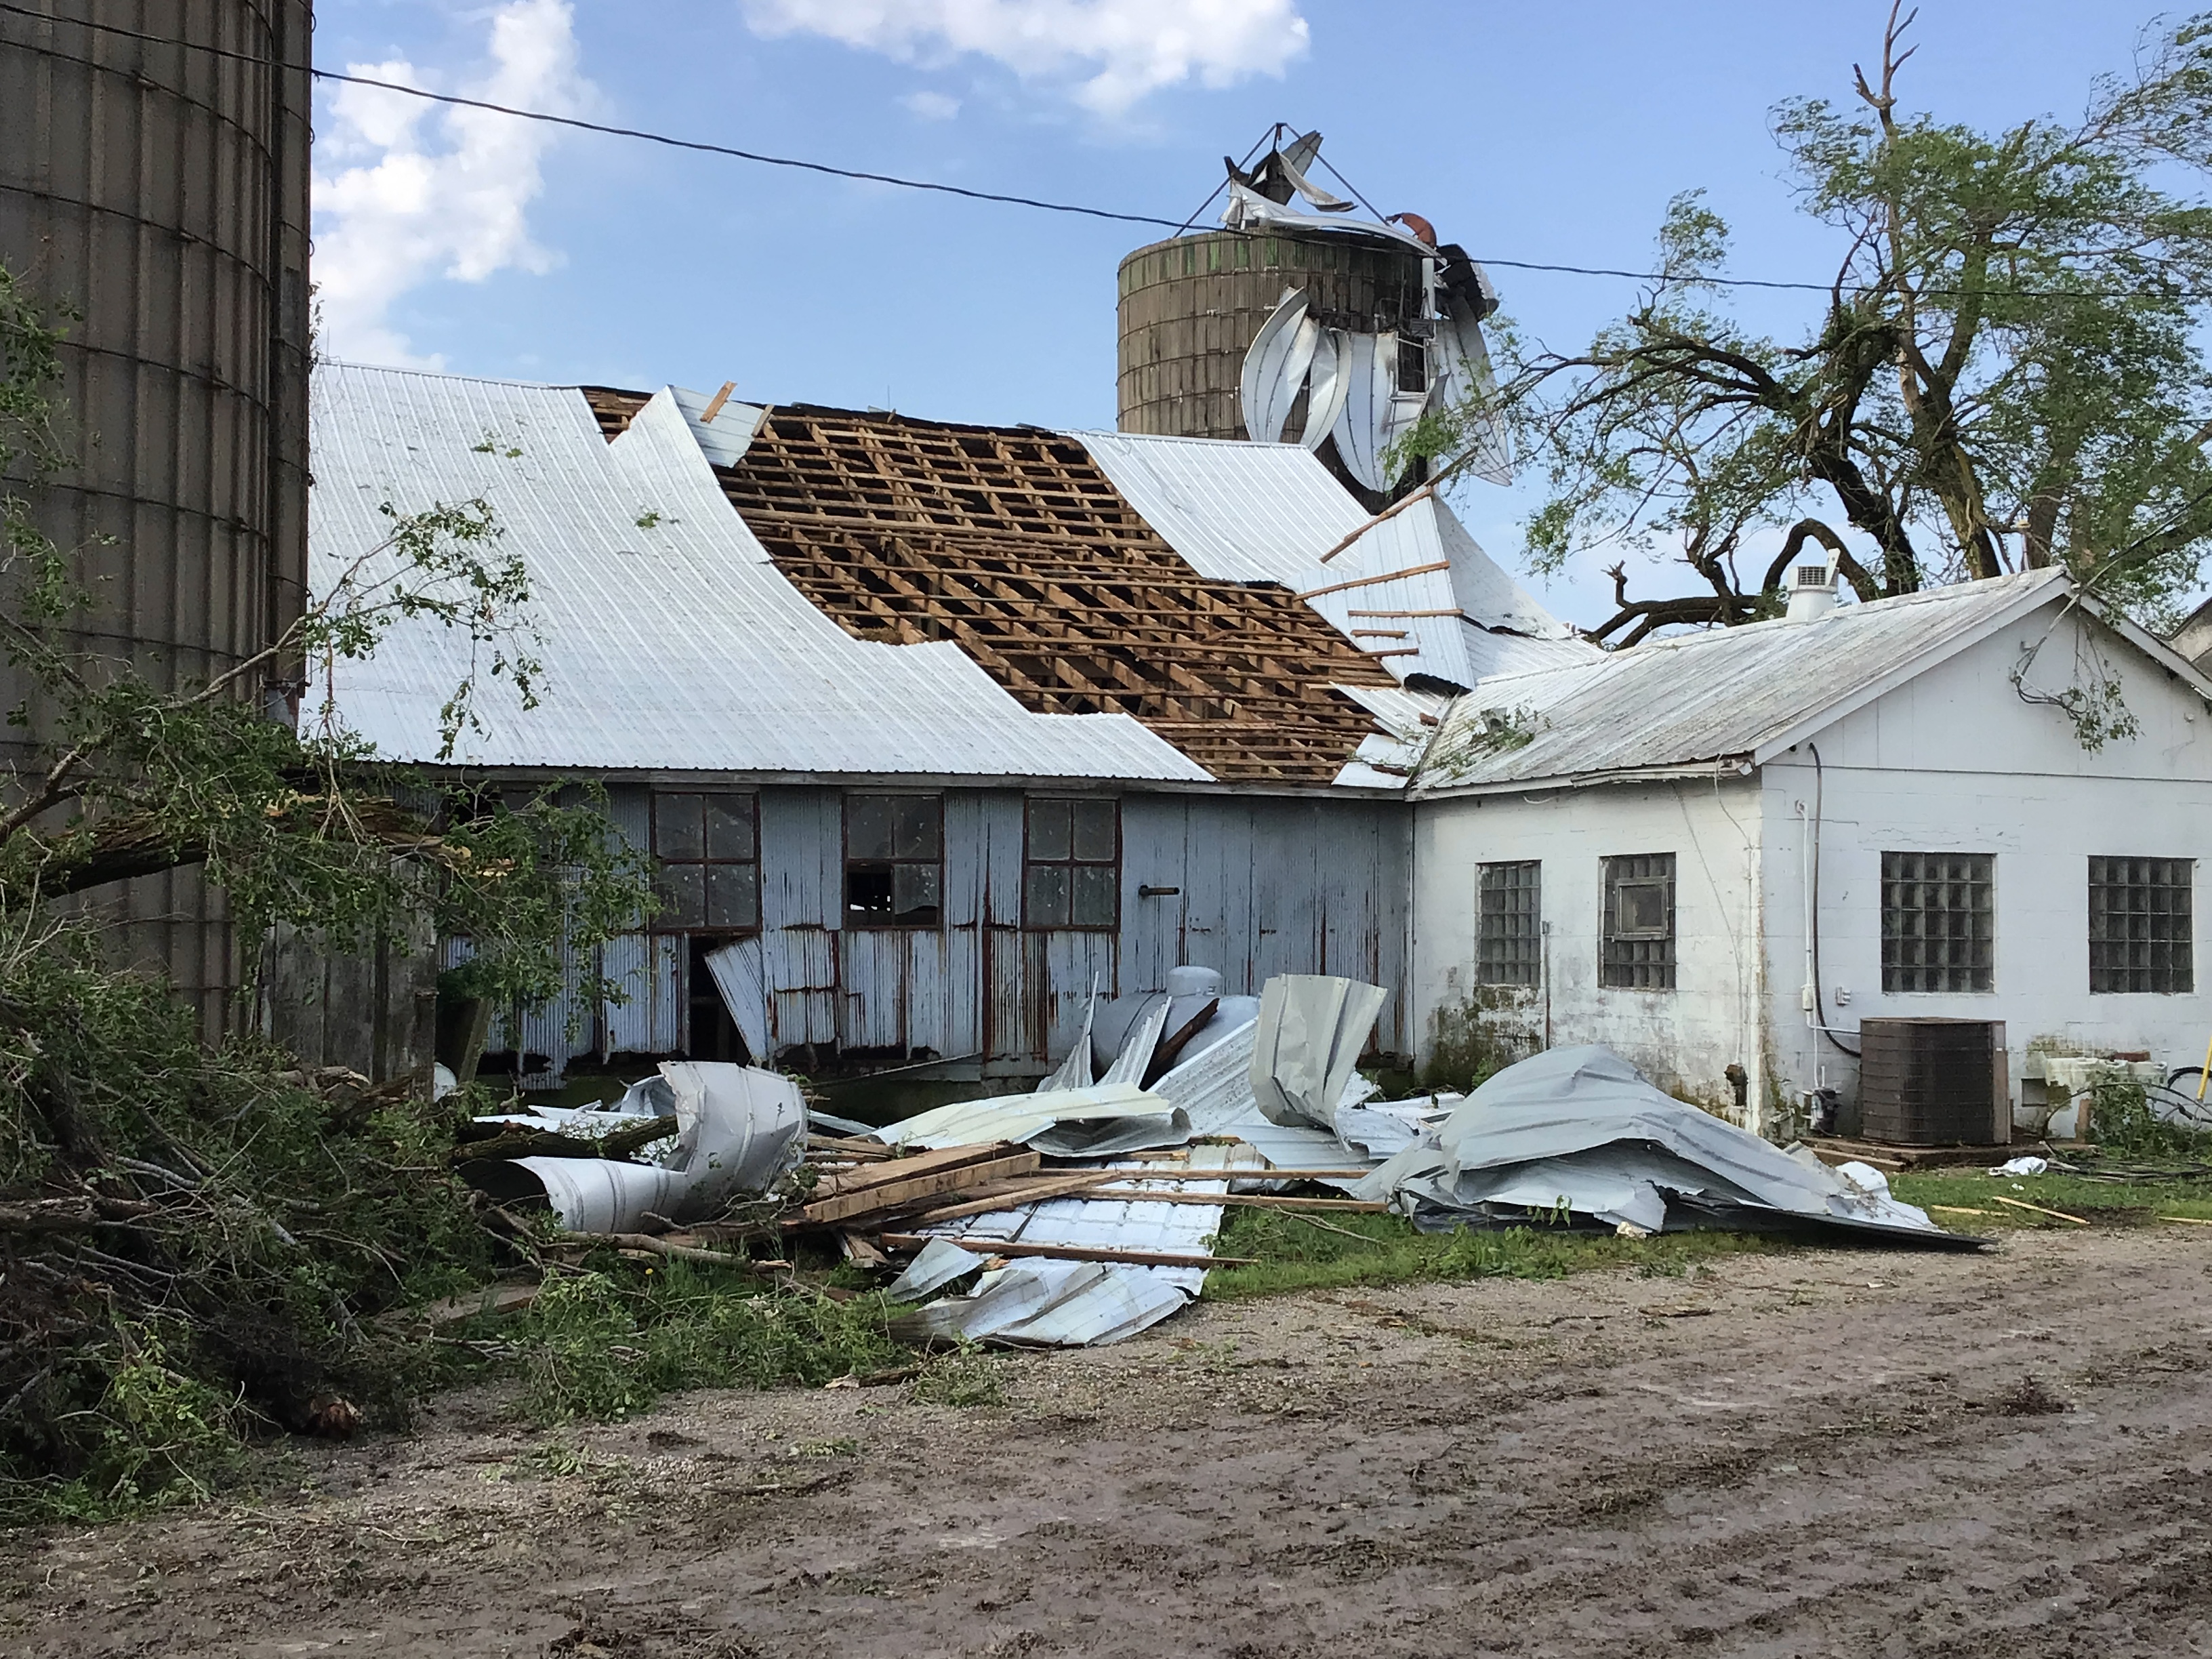 Part of a metal roof was torn off by the tornado, and a grain silo was also damaged.